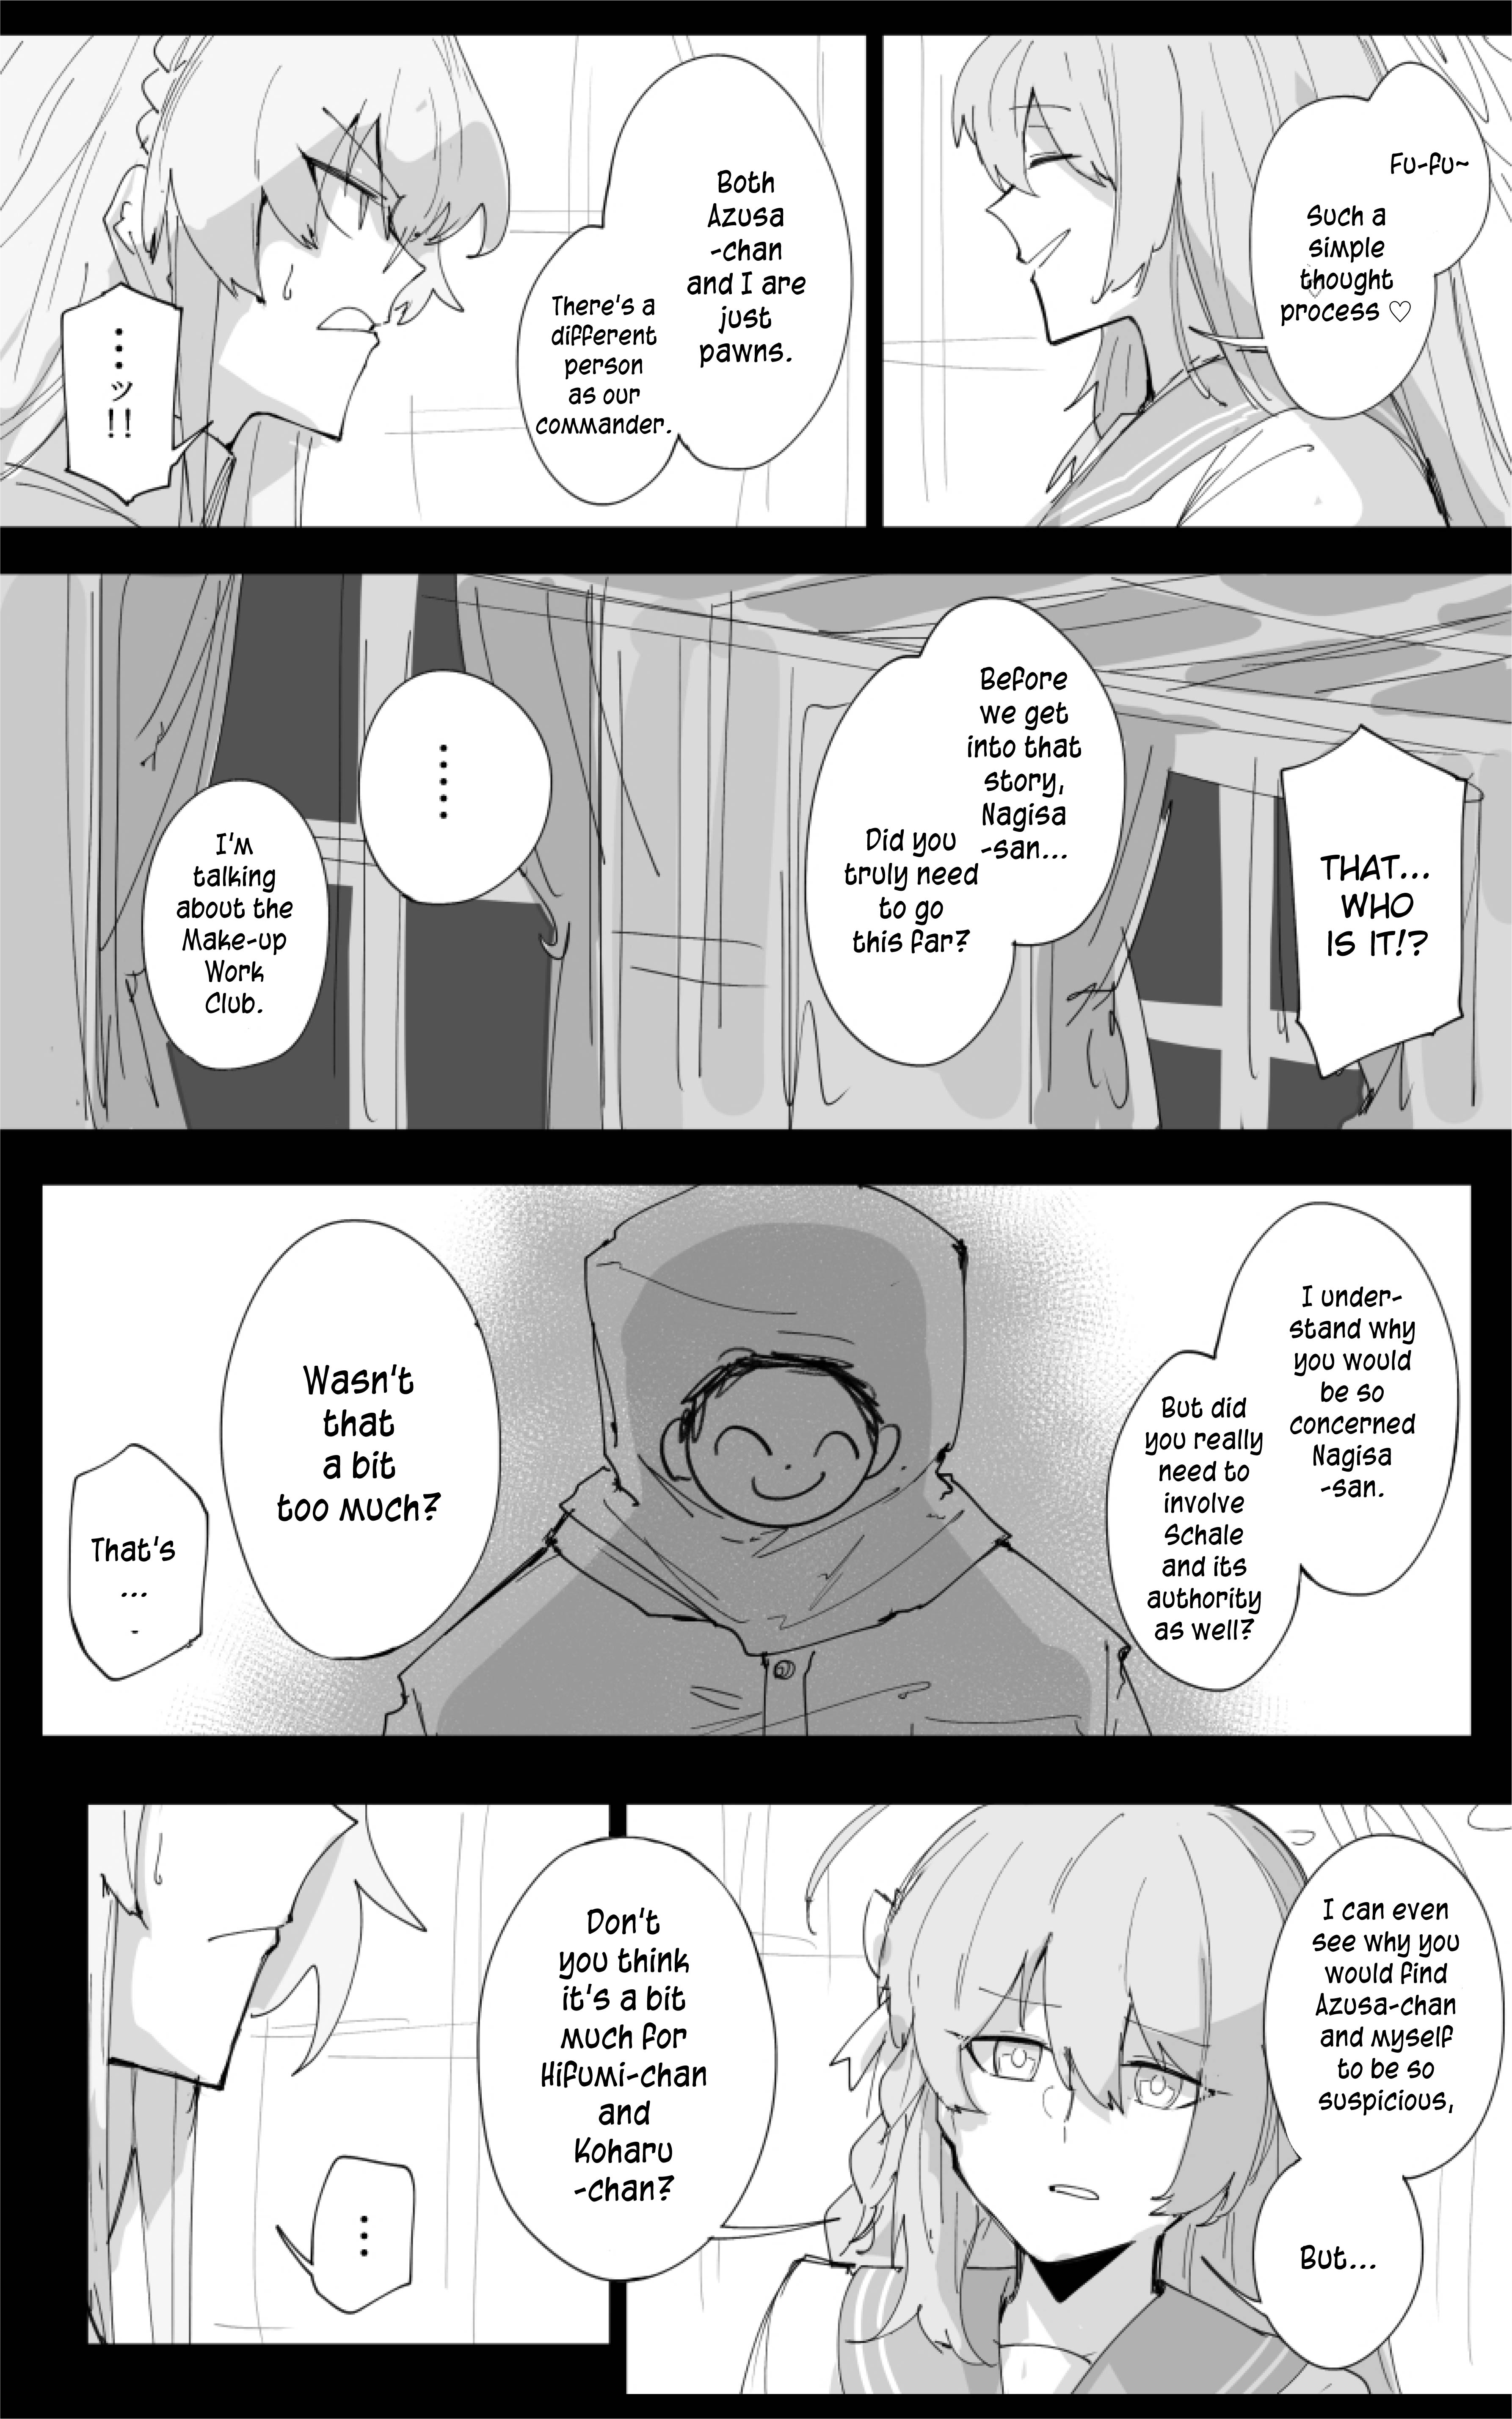 Blue Archive - Kankan's Blue Archive Logs (Doujinshi) - Page 2